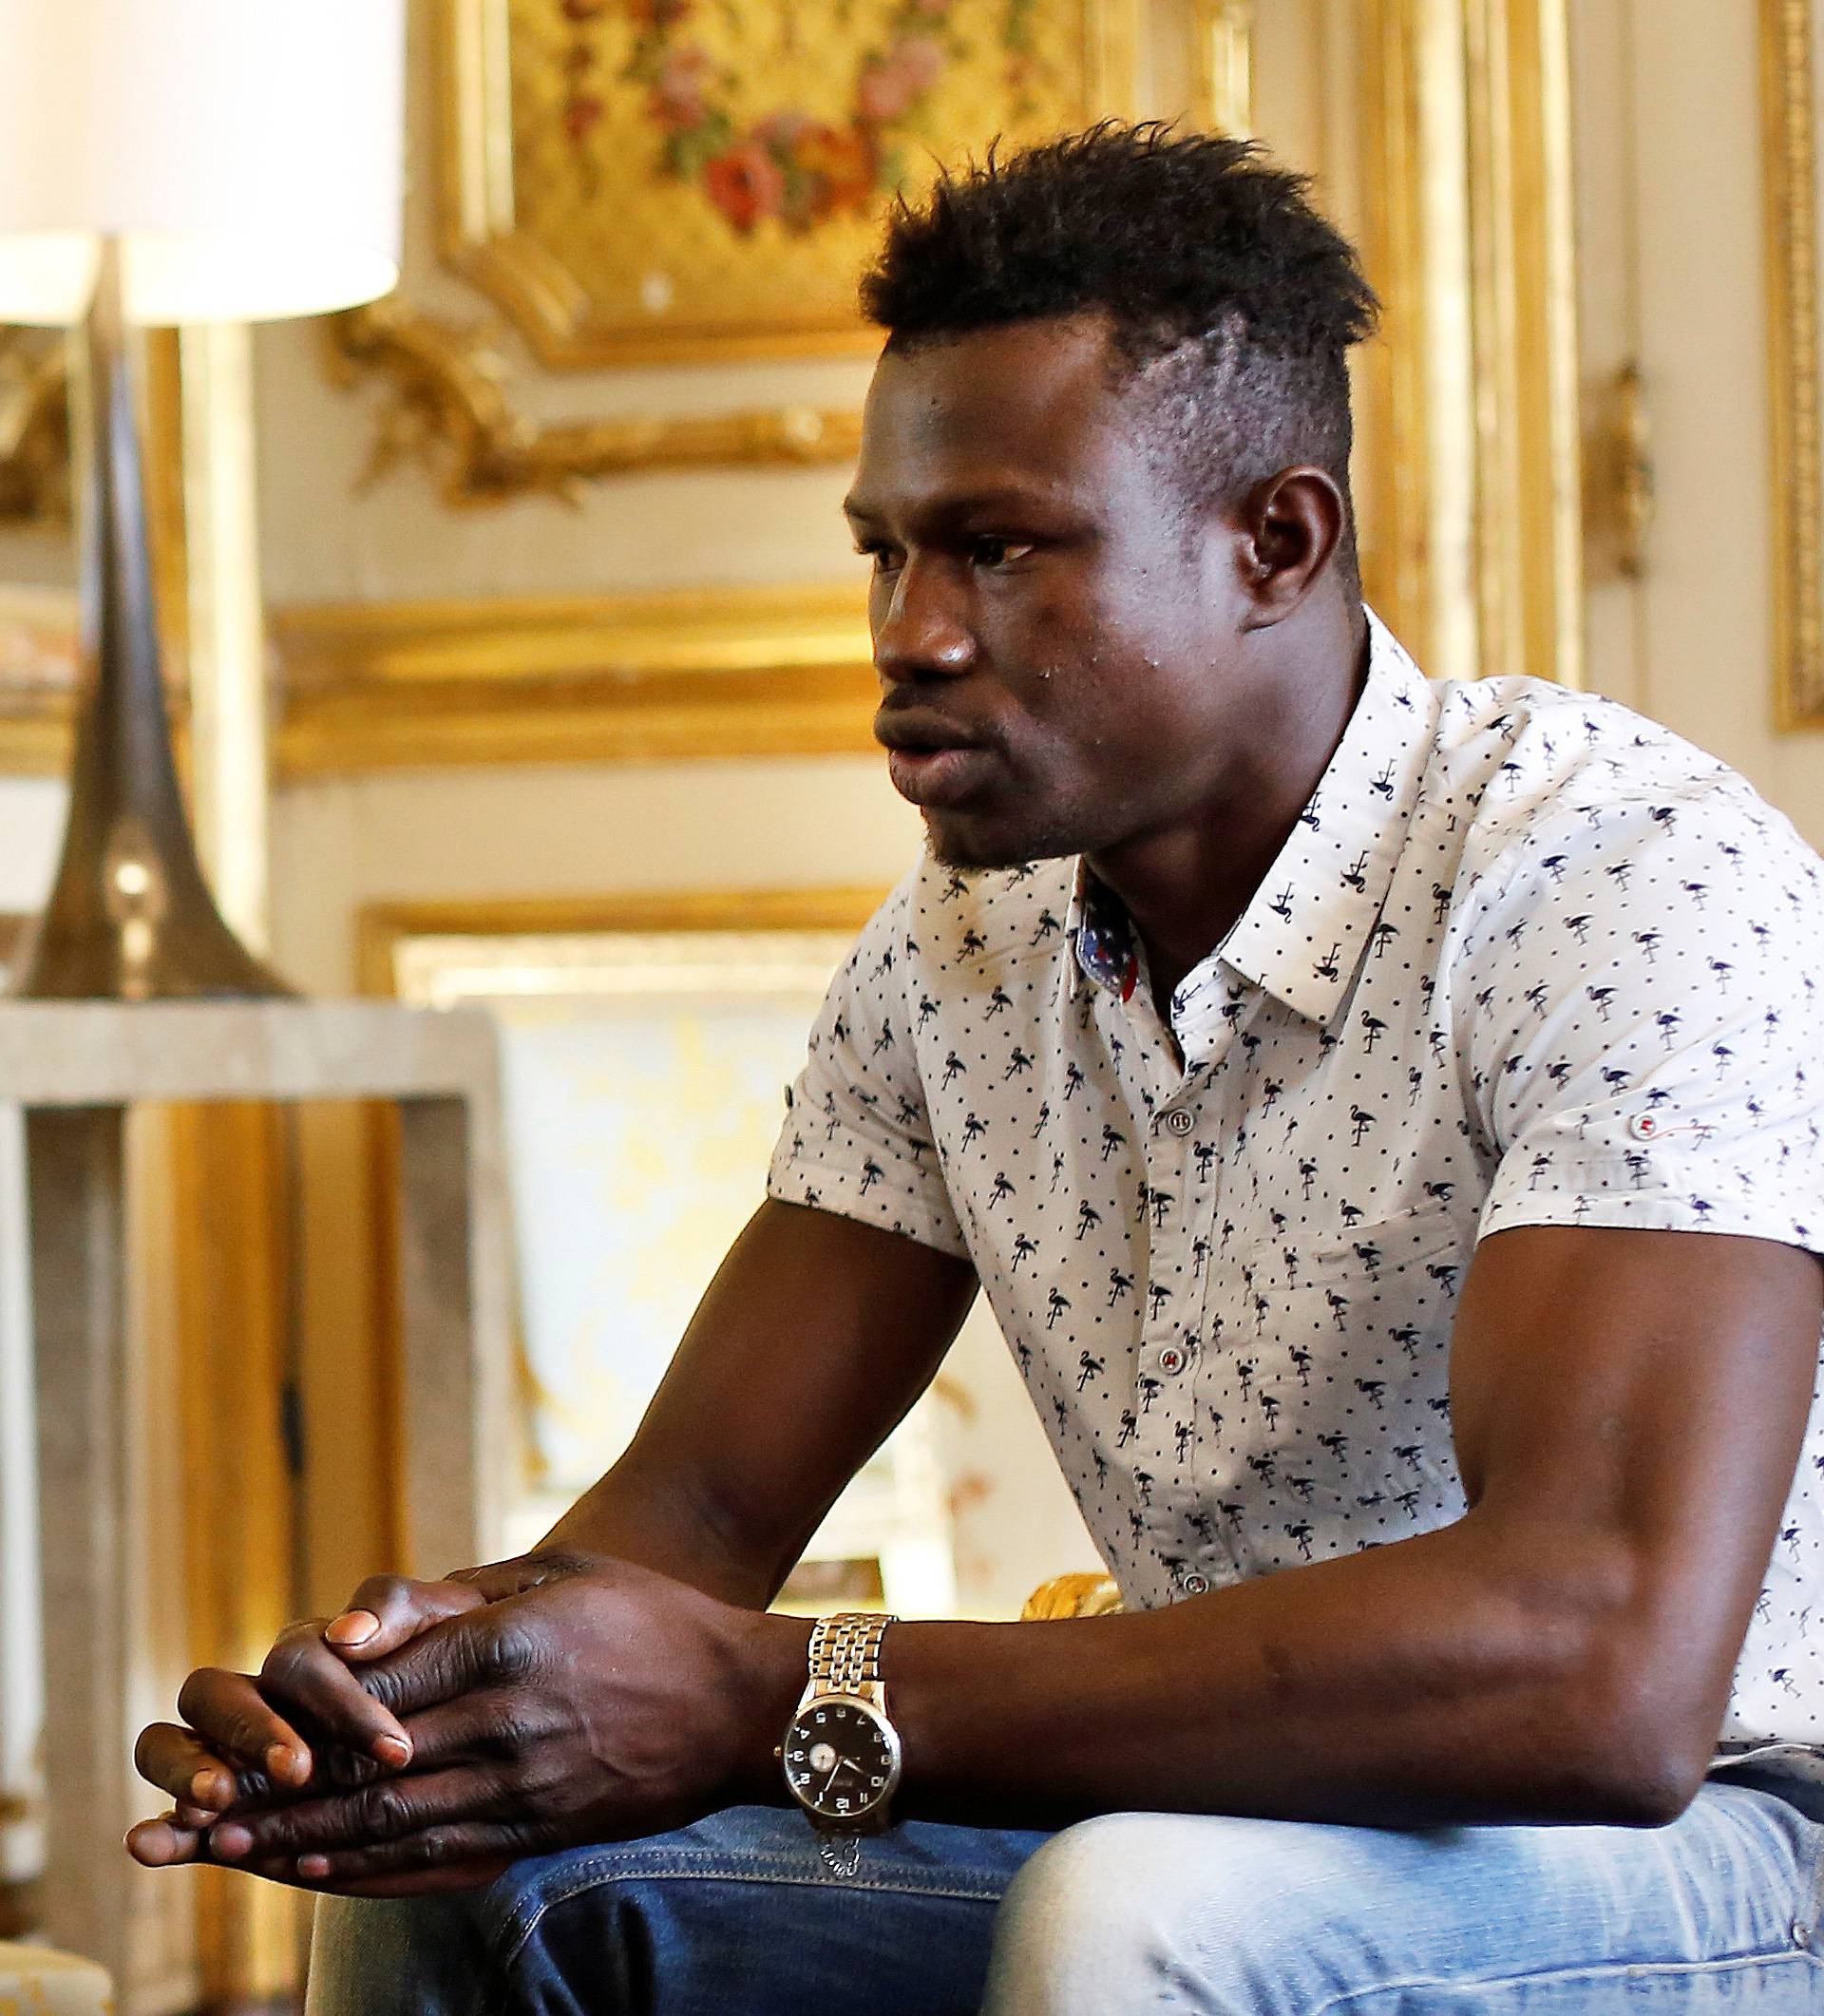 Mamoudou Gassama, 22, from Mali, is pictured during a meeting with French President Emmanuel Macron at the Elysee Palace in Paris